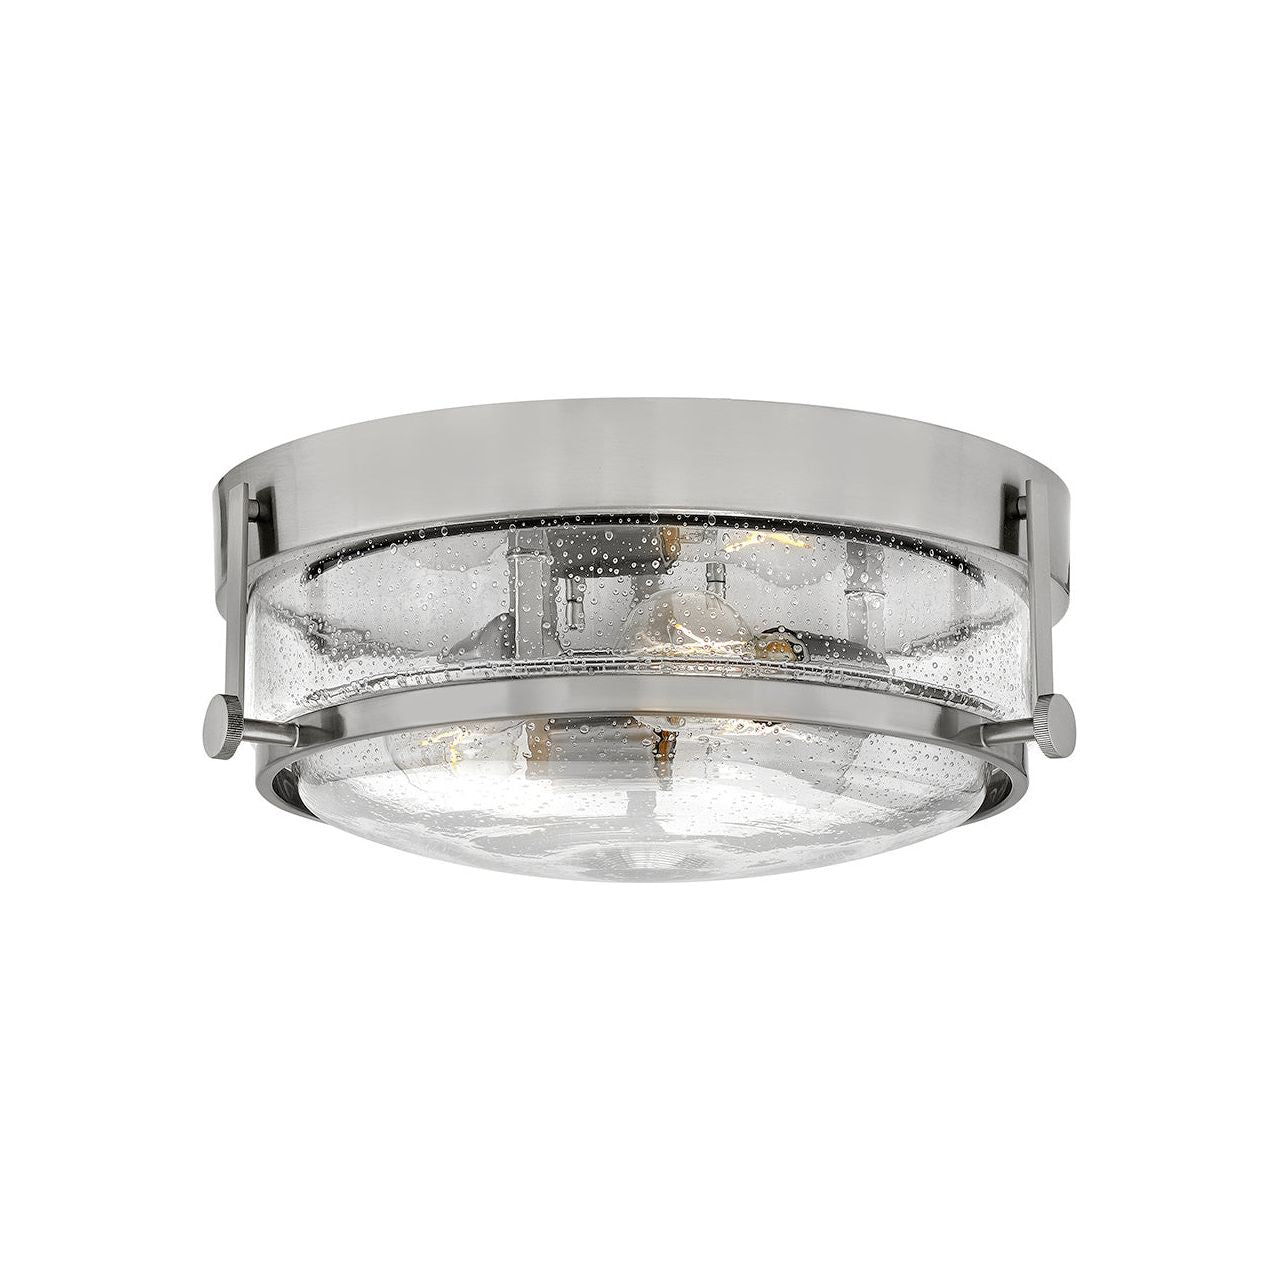 Hinkley Canada - 3640BN-CS - LED Flush Mount - Harper - Brushed Nickel with Clear Seedy glass